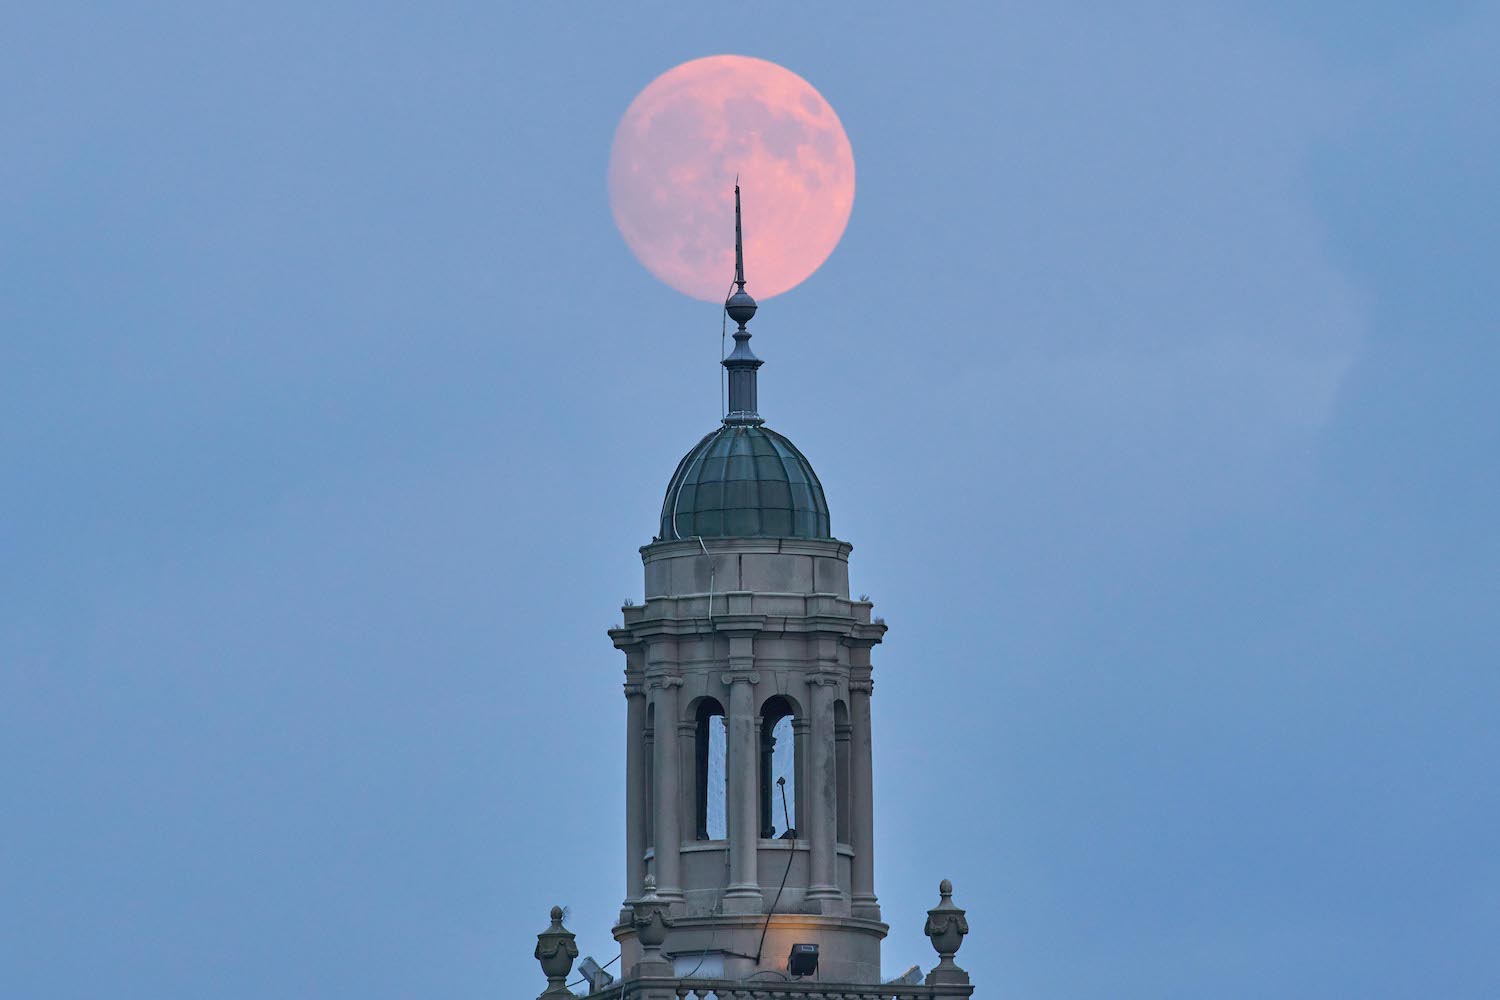 The moon rises over Swasey. Photo by Tim Black